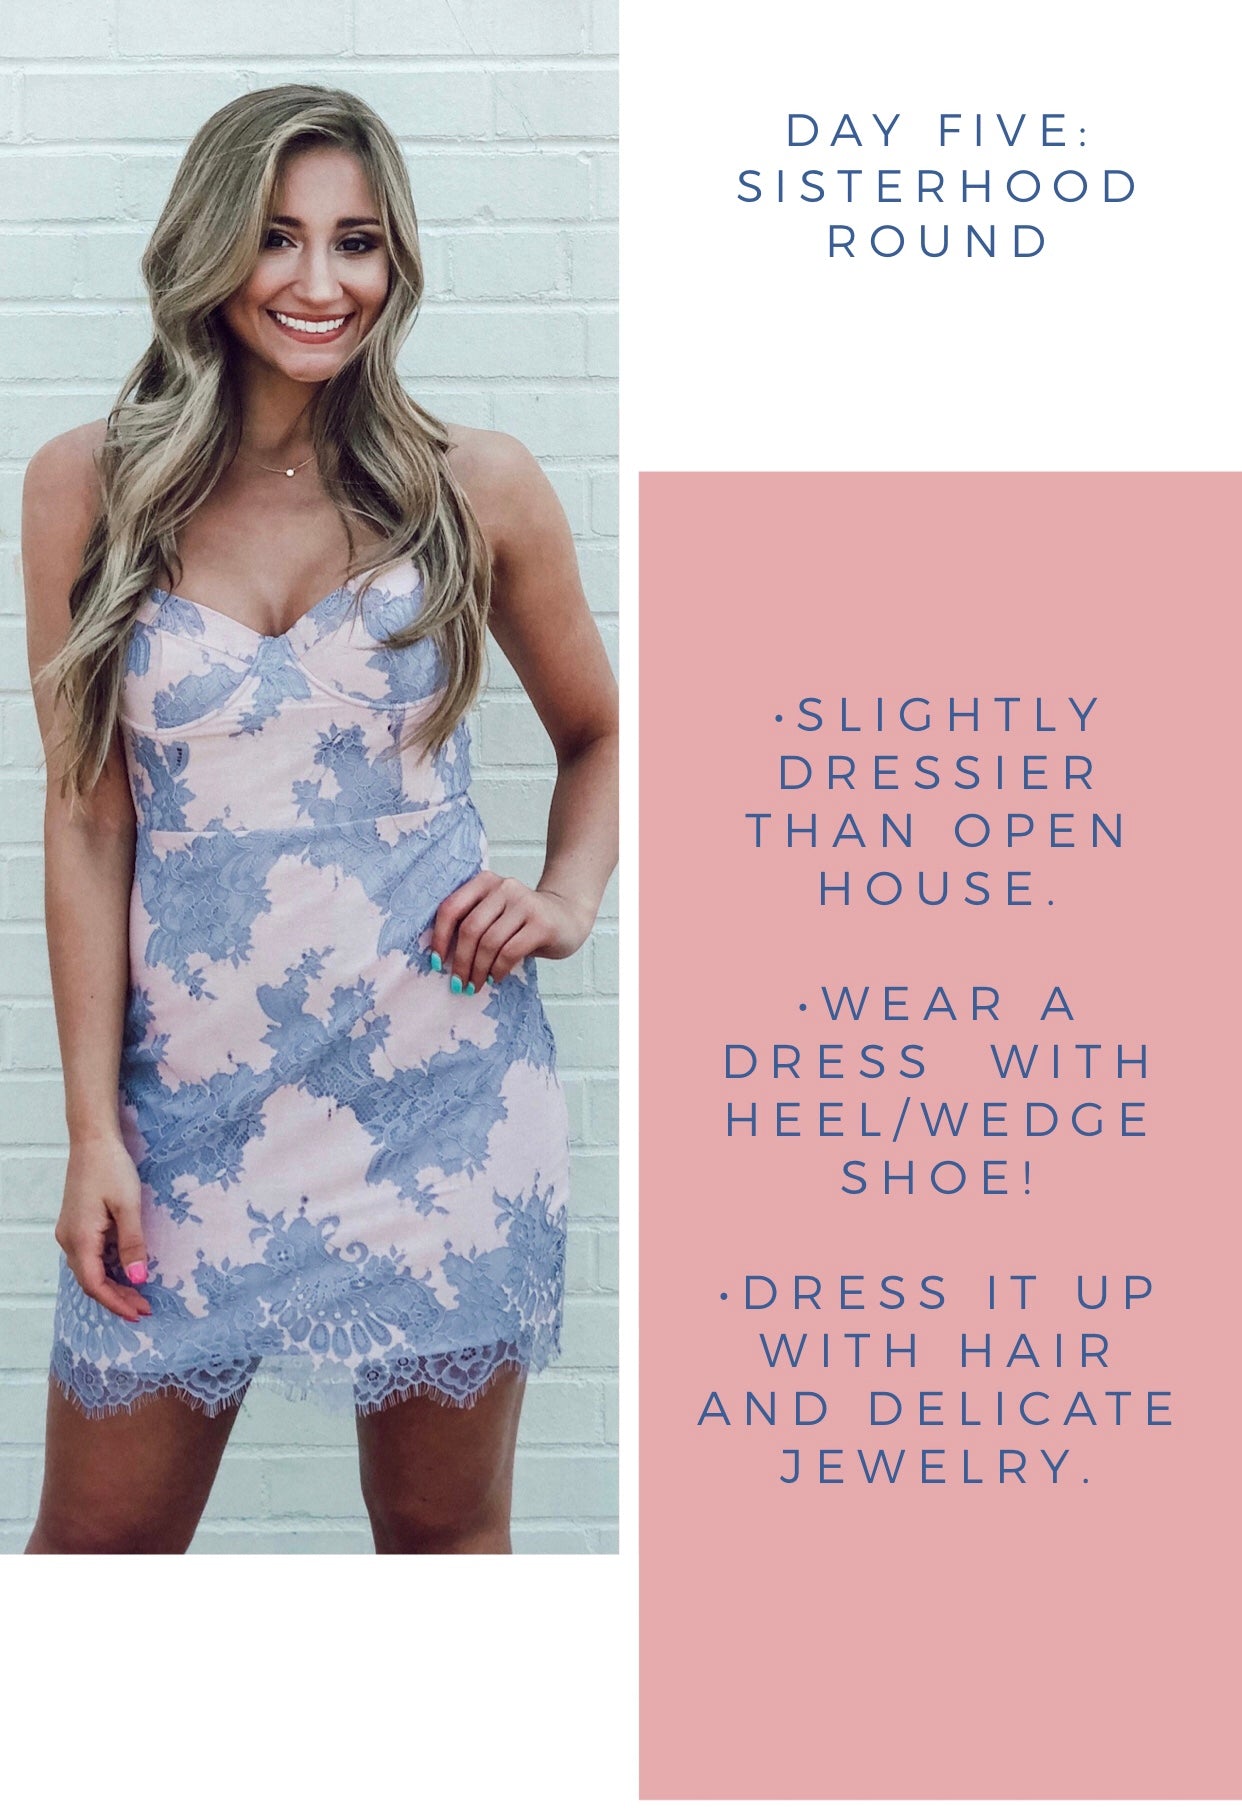 Soca Clothing What To Wear For Rush, Sorority Recruitment 2019